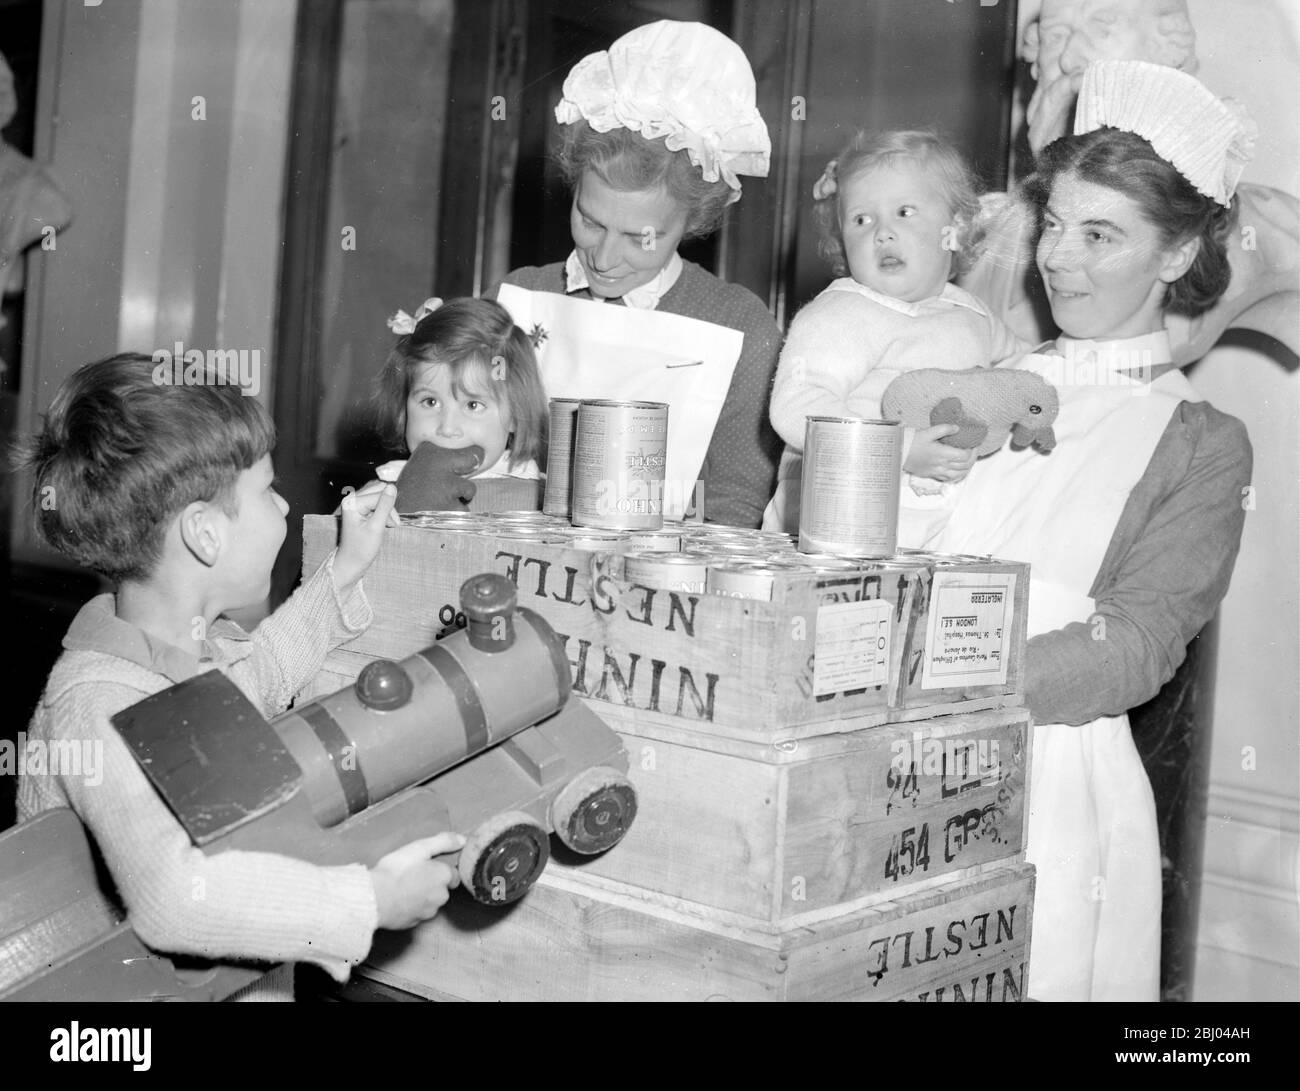 A cargo of food parcels for British hospitals from Brazil are being sent to St Thomas's Hospital. - Sister Lillian and Sister Seymour with some of the children of St Thomas's Hospital receiving some of the food parcels today. - 13 September 1948 - - - - - - - - - - - - - - - - - - - - - - - - - - - - - Stock Photo